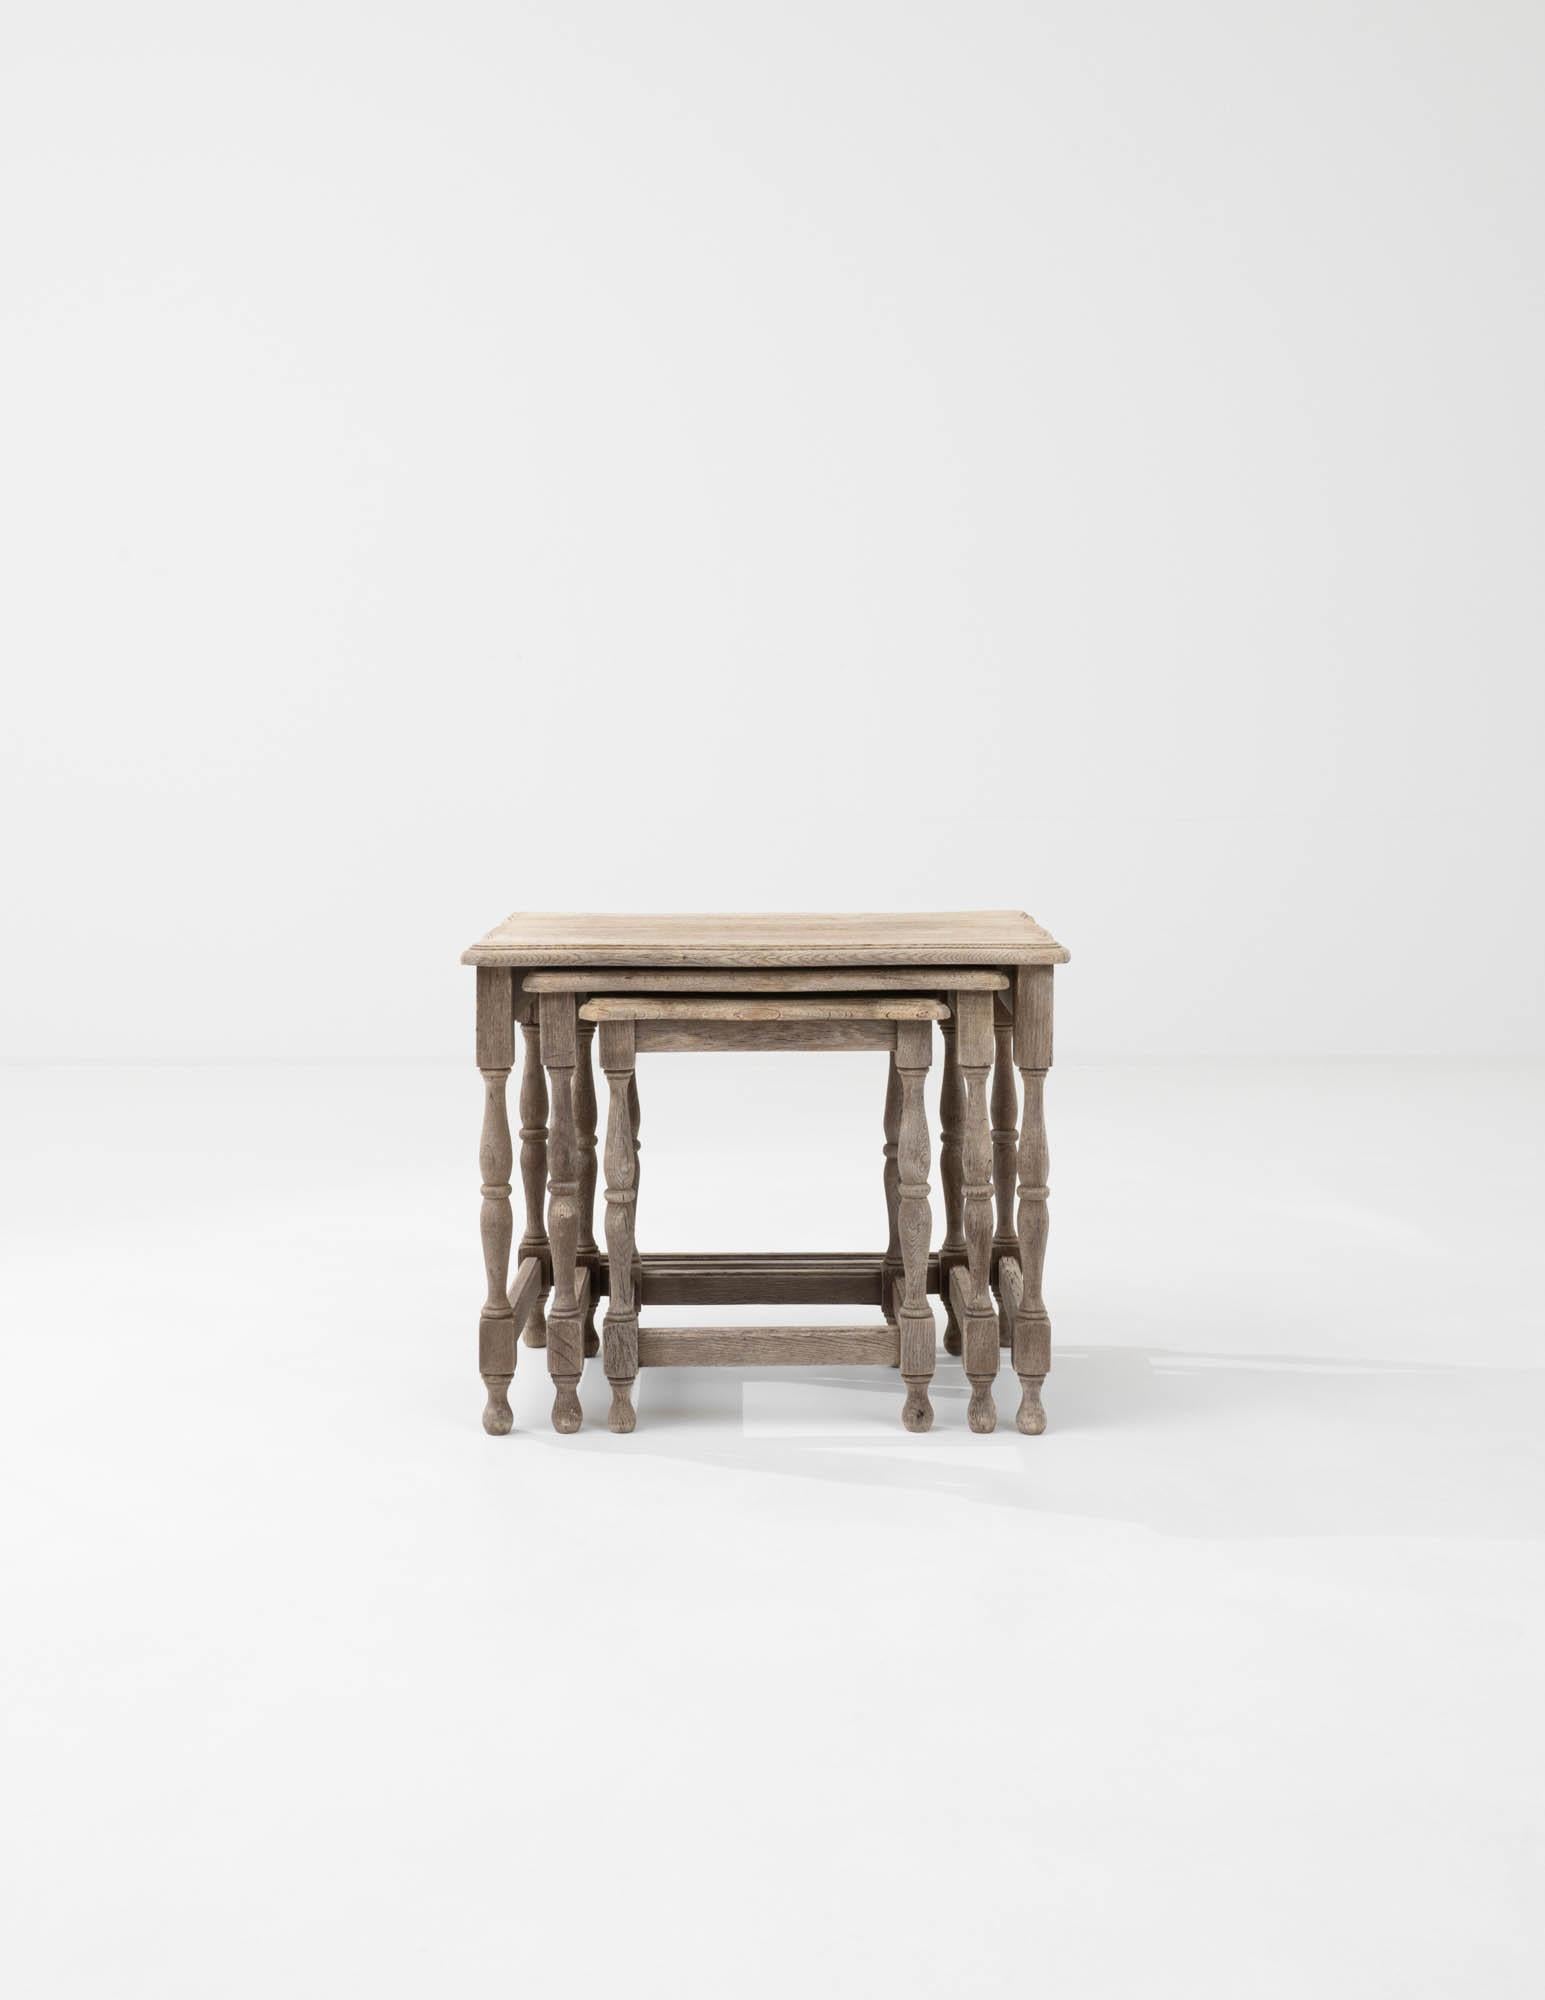 Introduce the charm of versatile design into your home with this set of three 20th Century Belgian Bleached Oak Nesting Tables. Each table is a marvel of classic craftsmanship, featuring the light and airy finish of bleached oak that evokes a sense